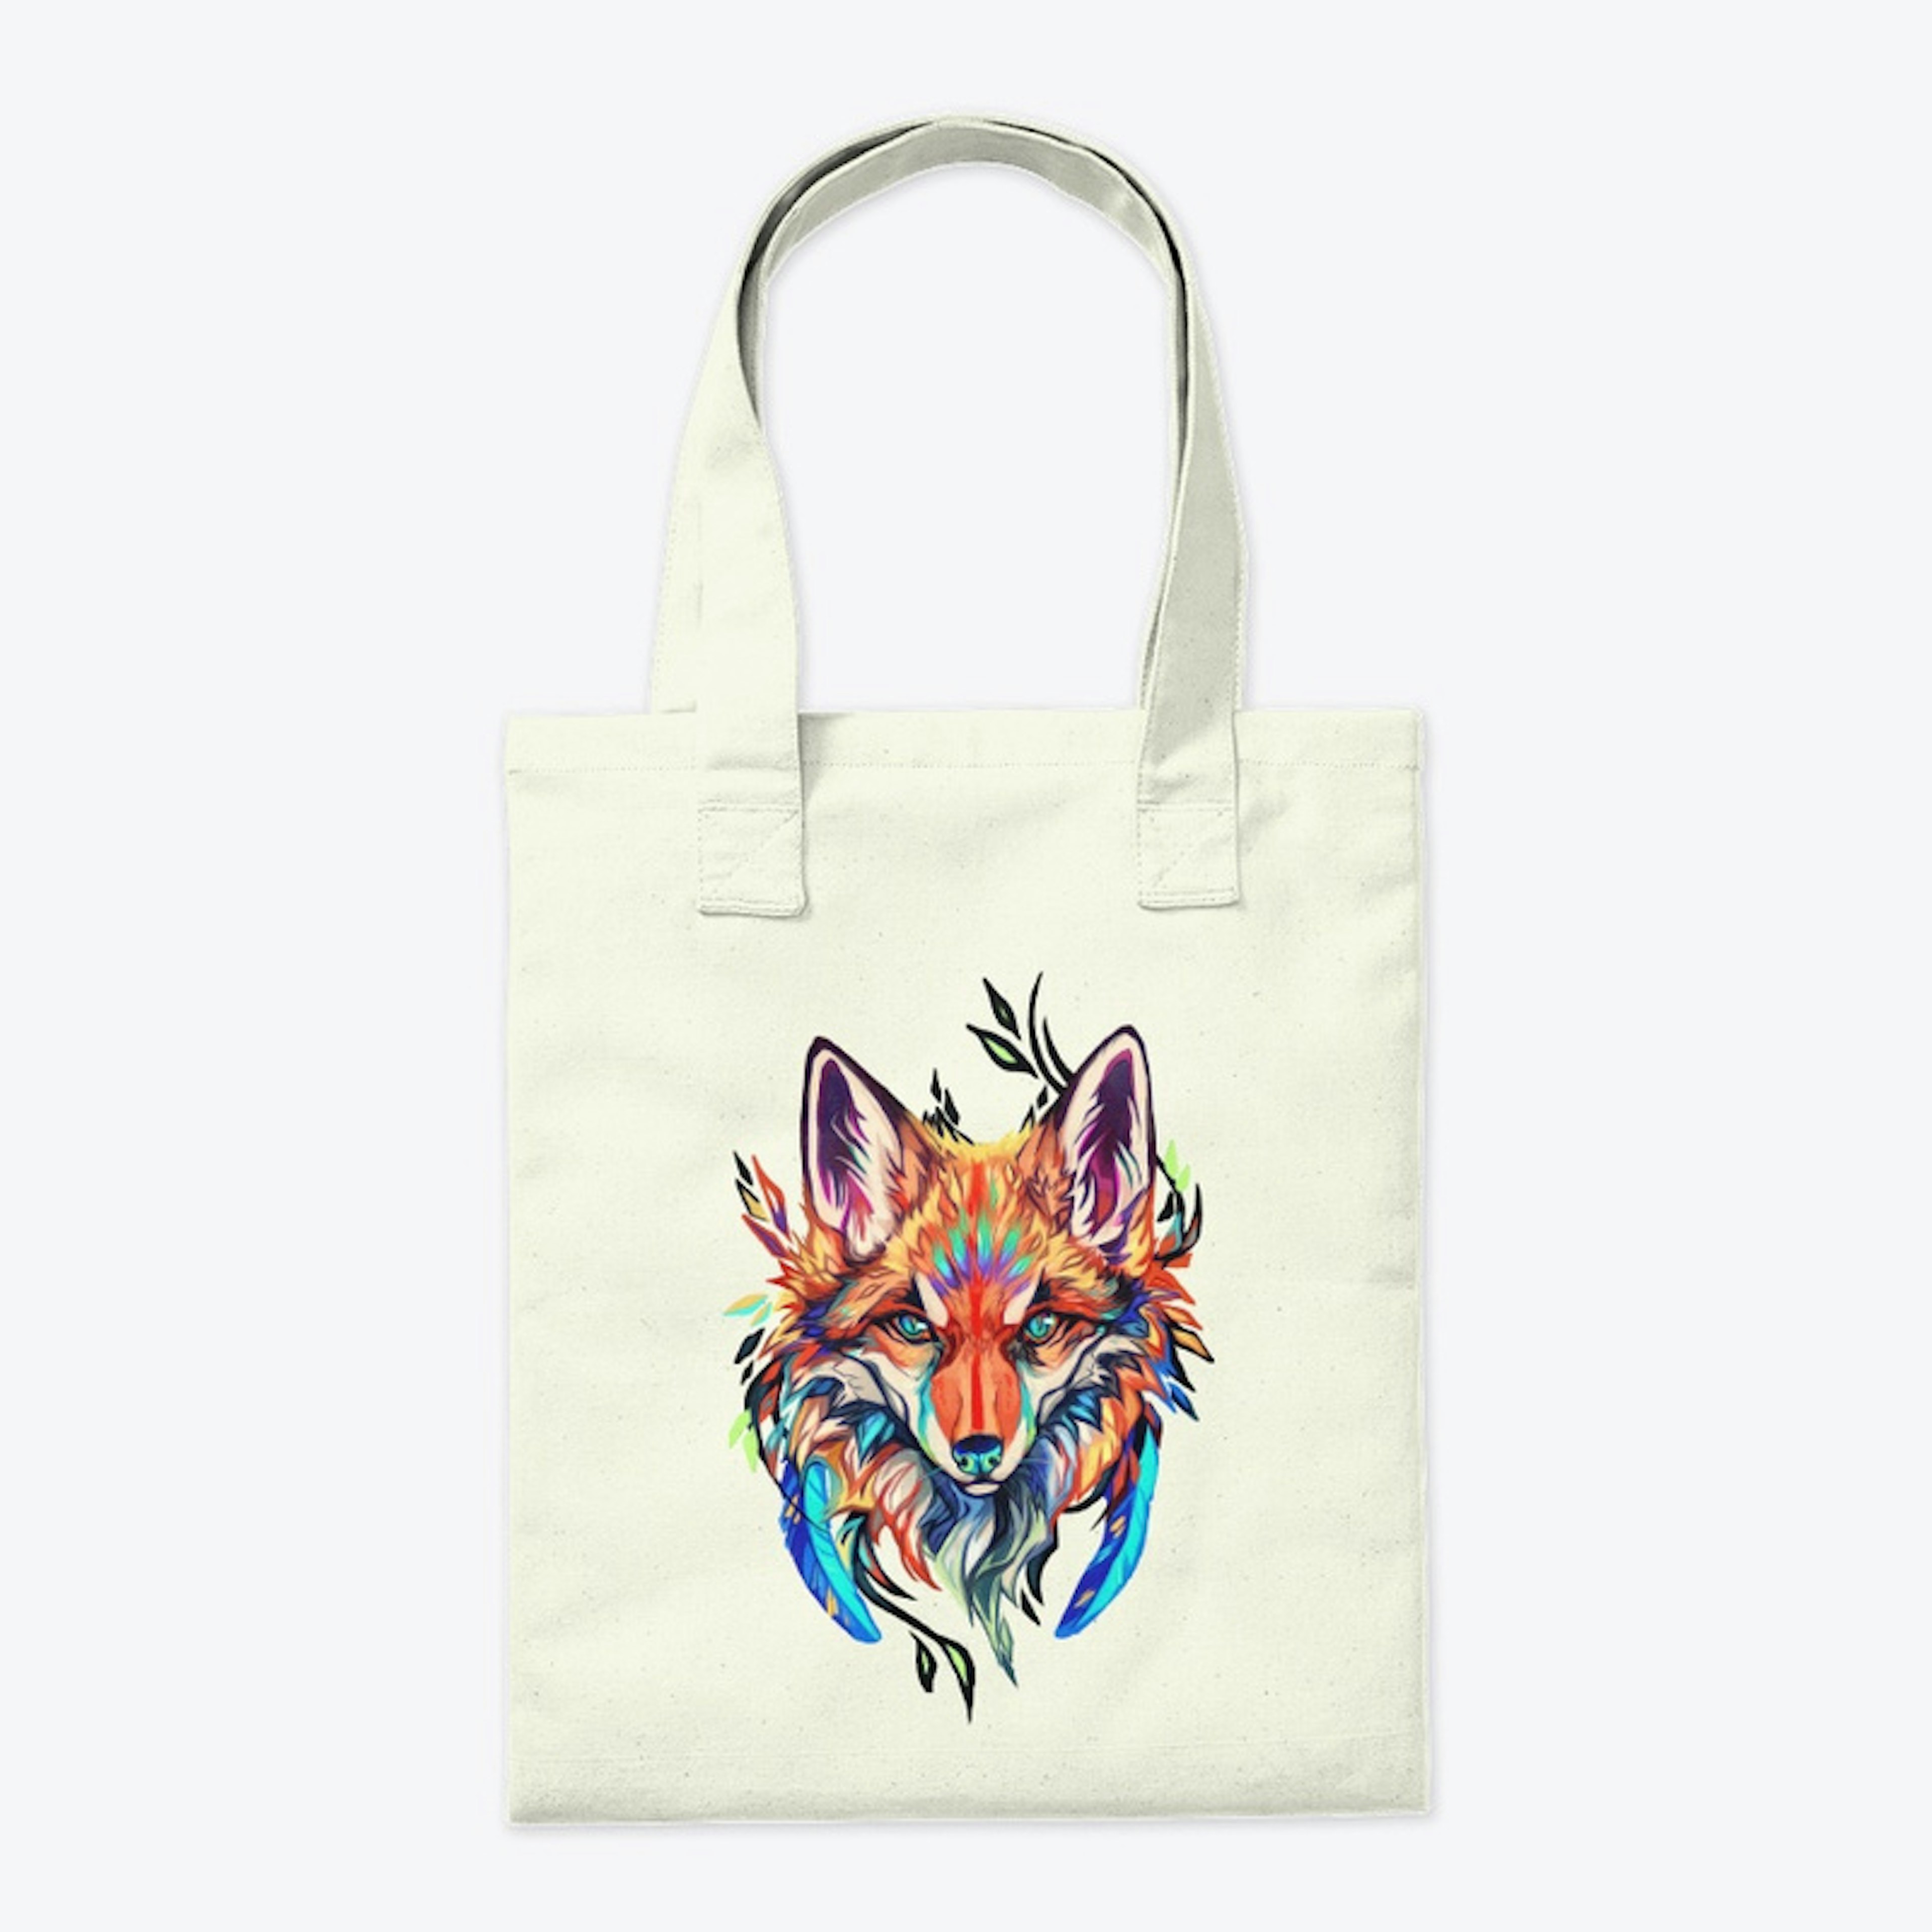 Tote Bag of the Plucked Fox